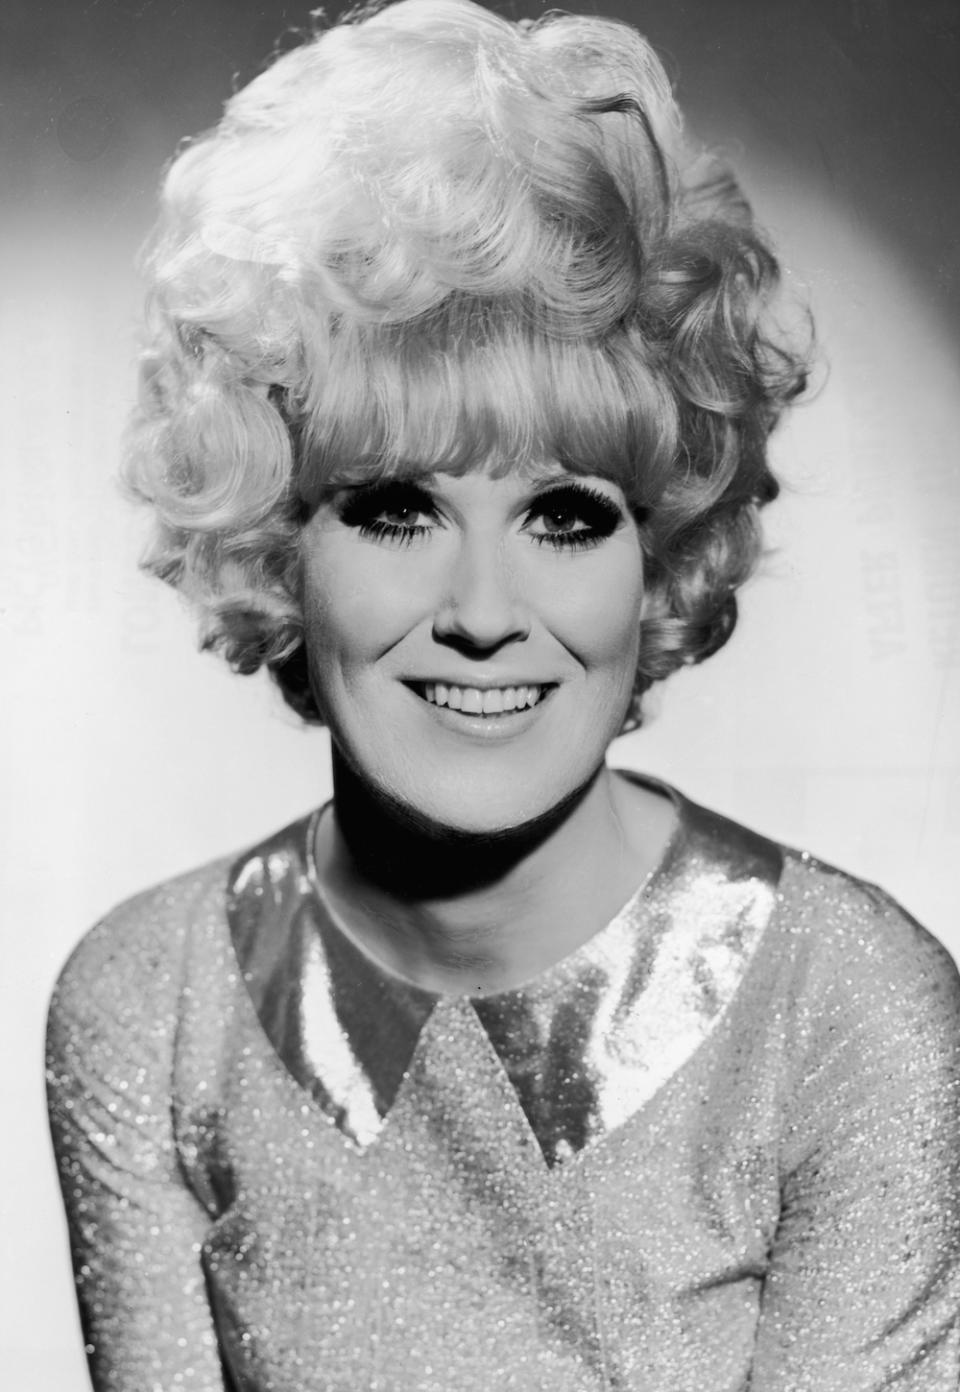 <p> Bouffant hairstyles were also commonly styled in piled-high curls back in the '60s, with the look often seen on music legend Dusty Springfield. Here, her look also features a classic block fringe and was probably set with a <em>lot</em> of hairspray. </p>